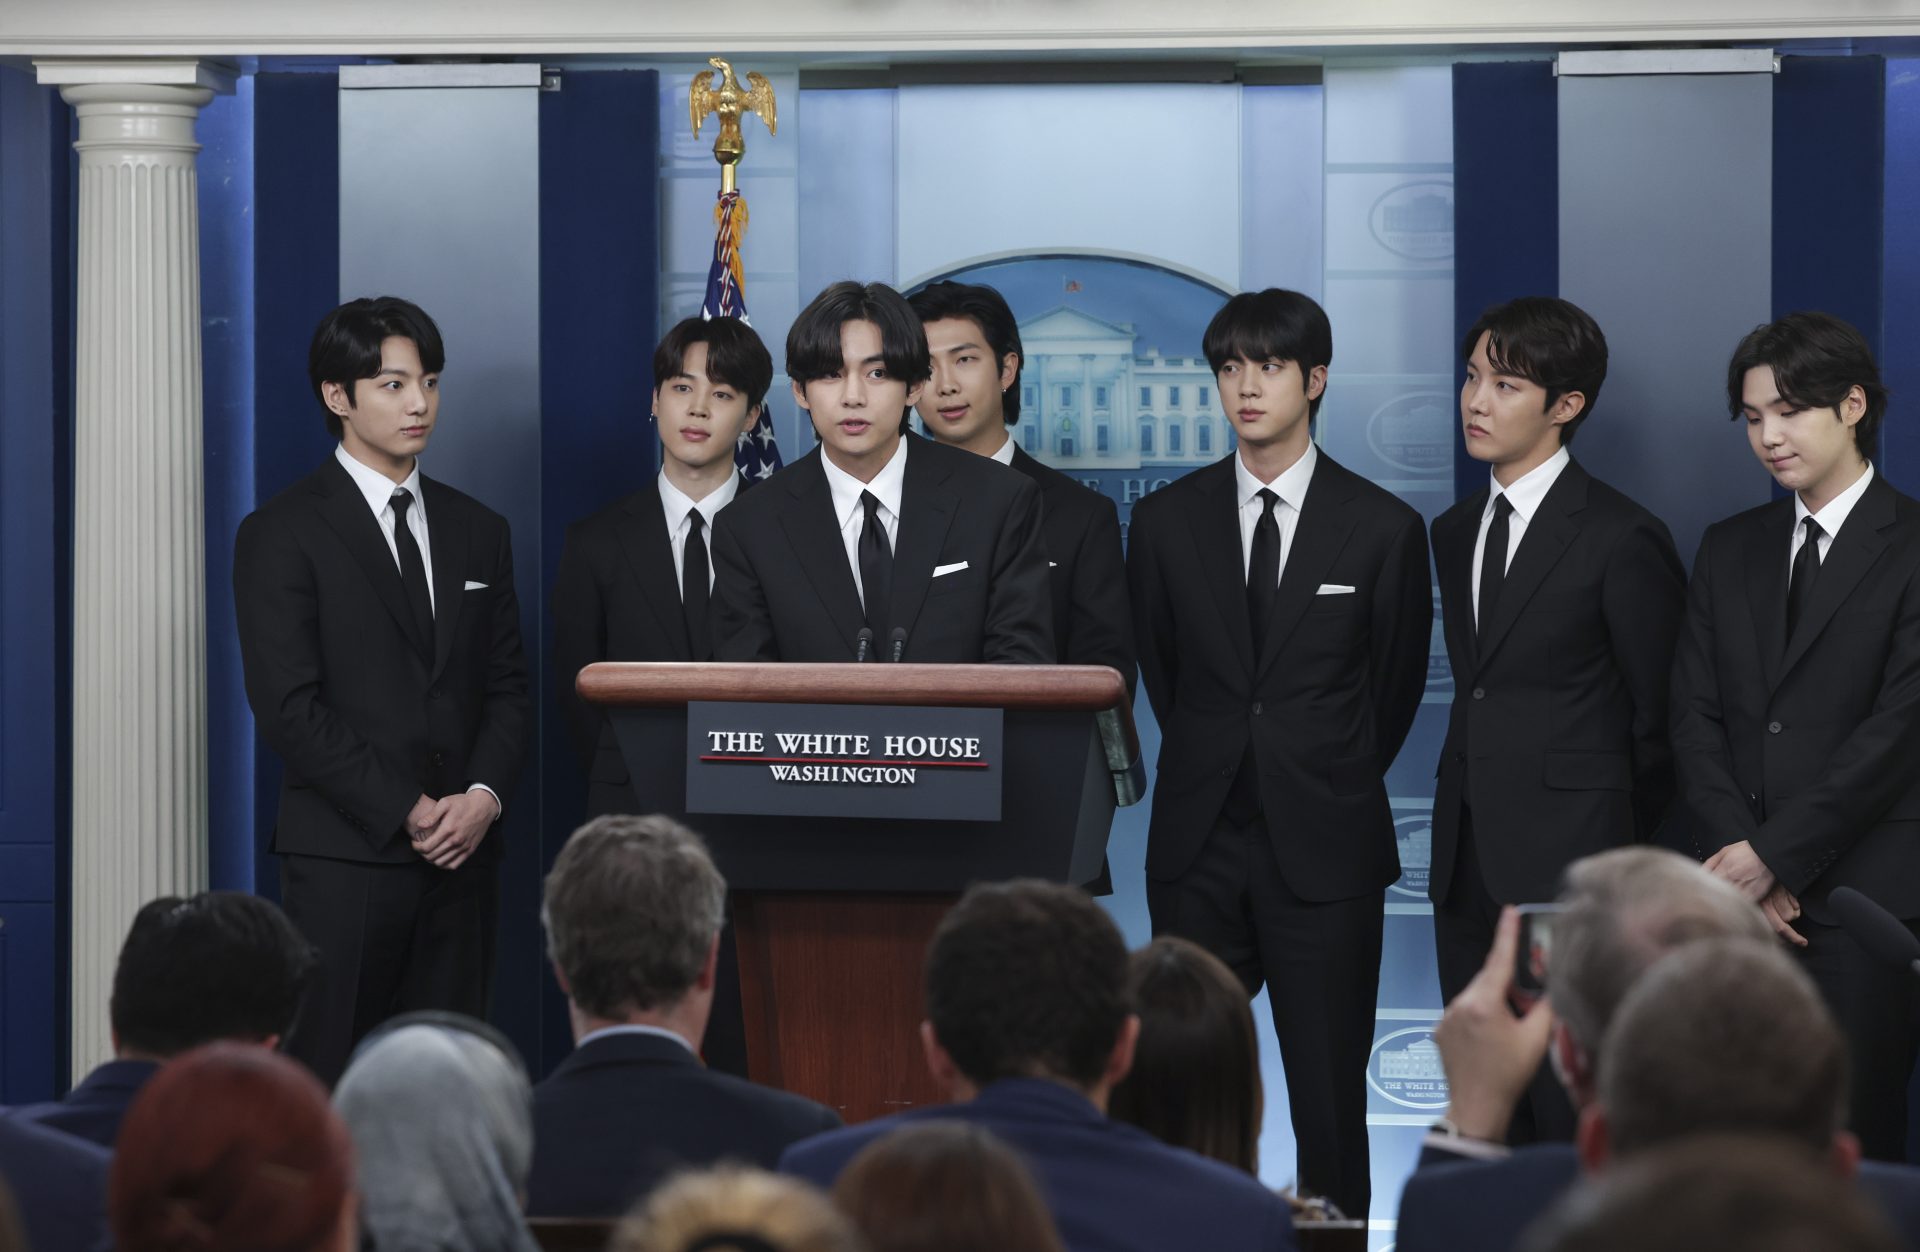 K-Pop Group BTS at the White House Press Daily Briefing